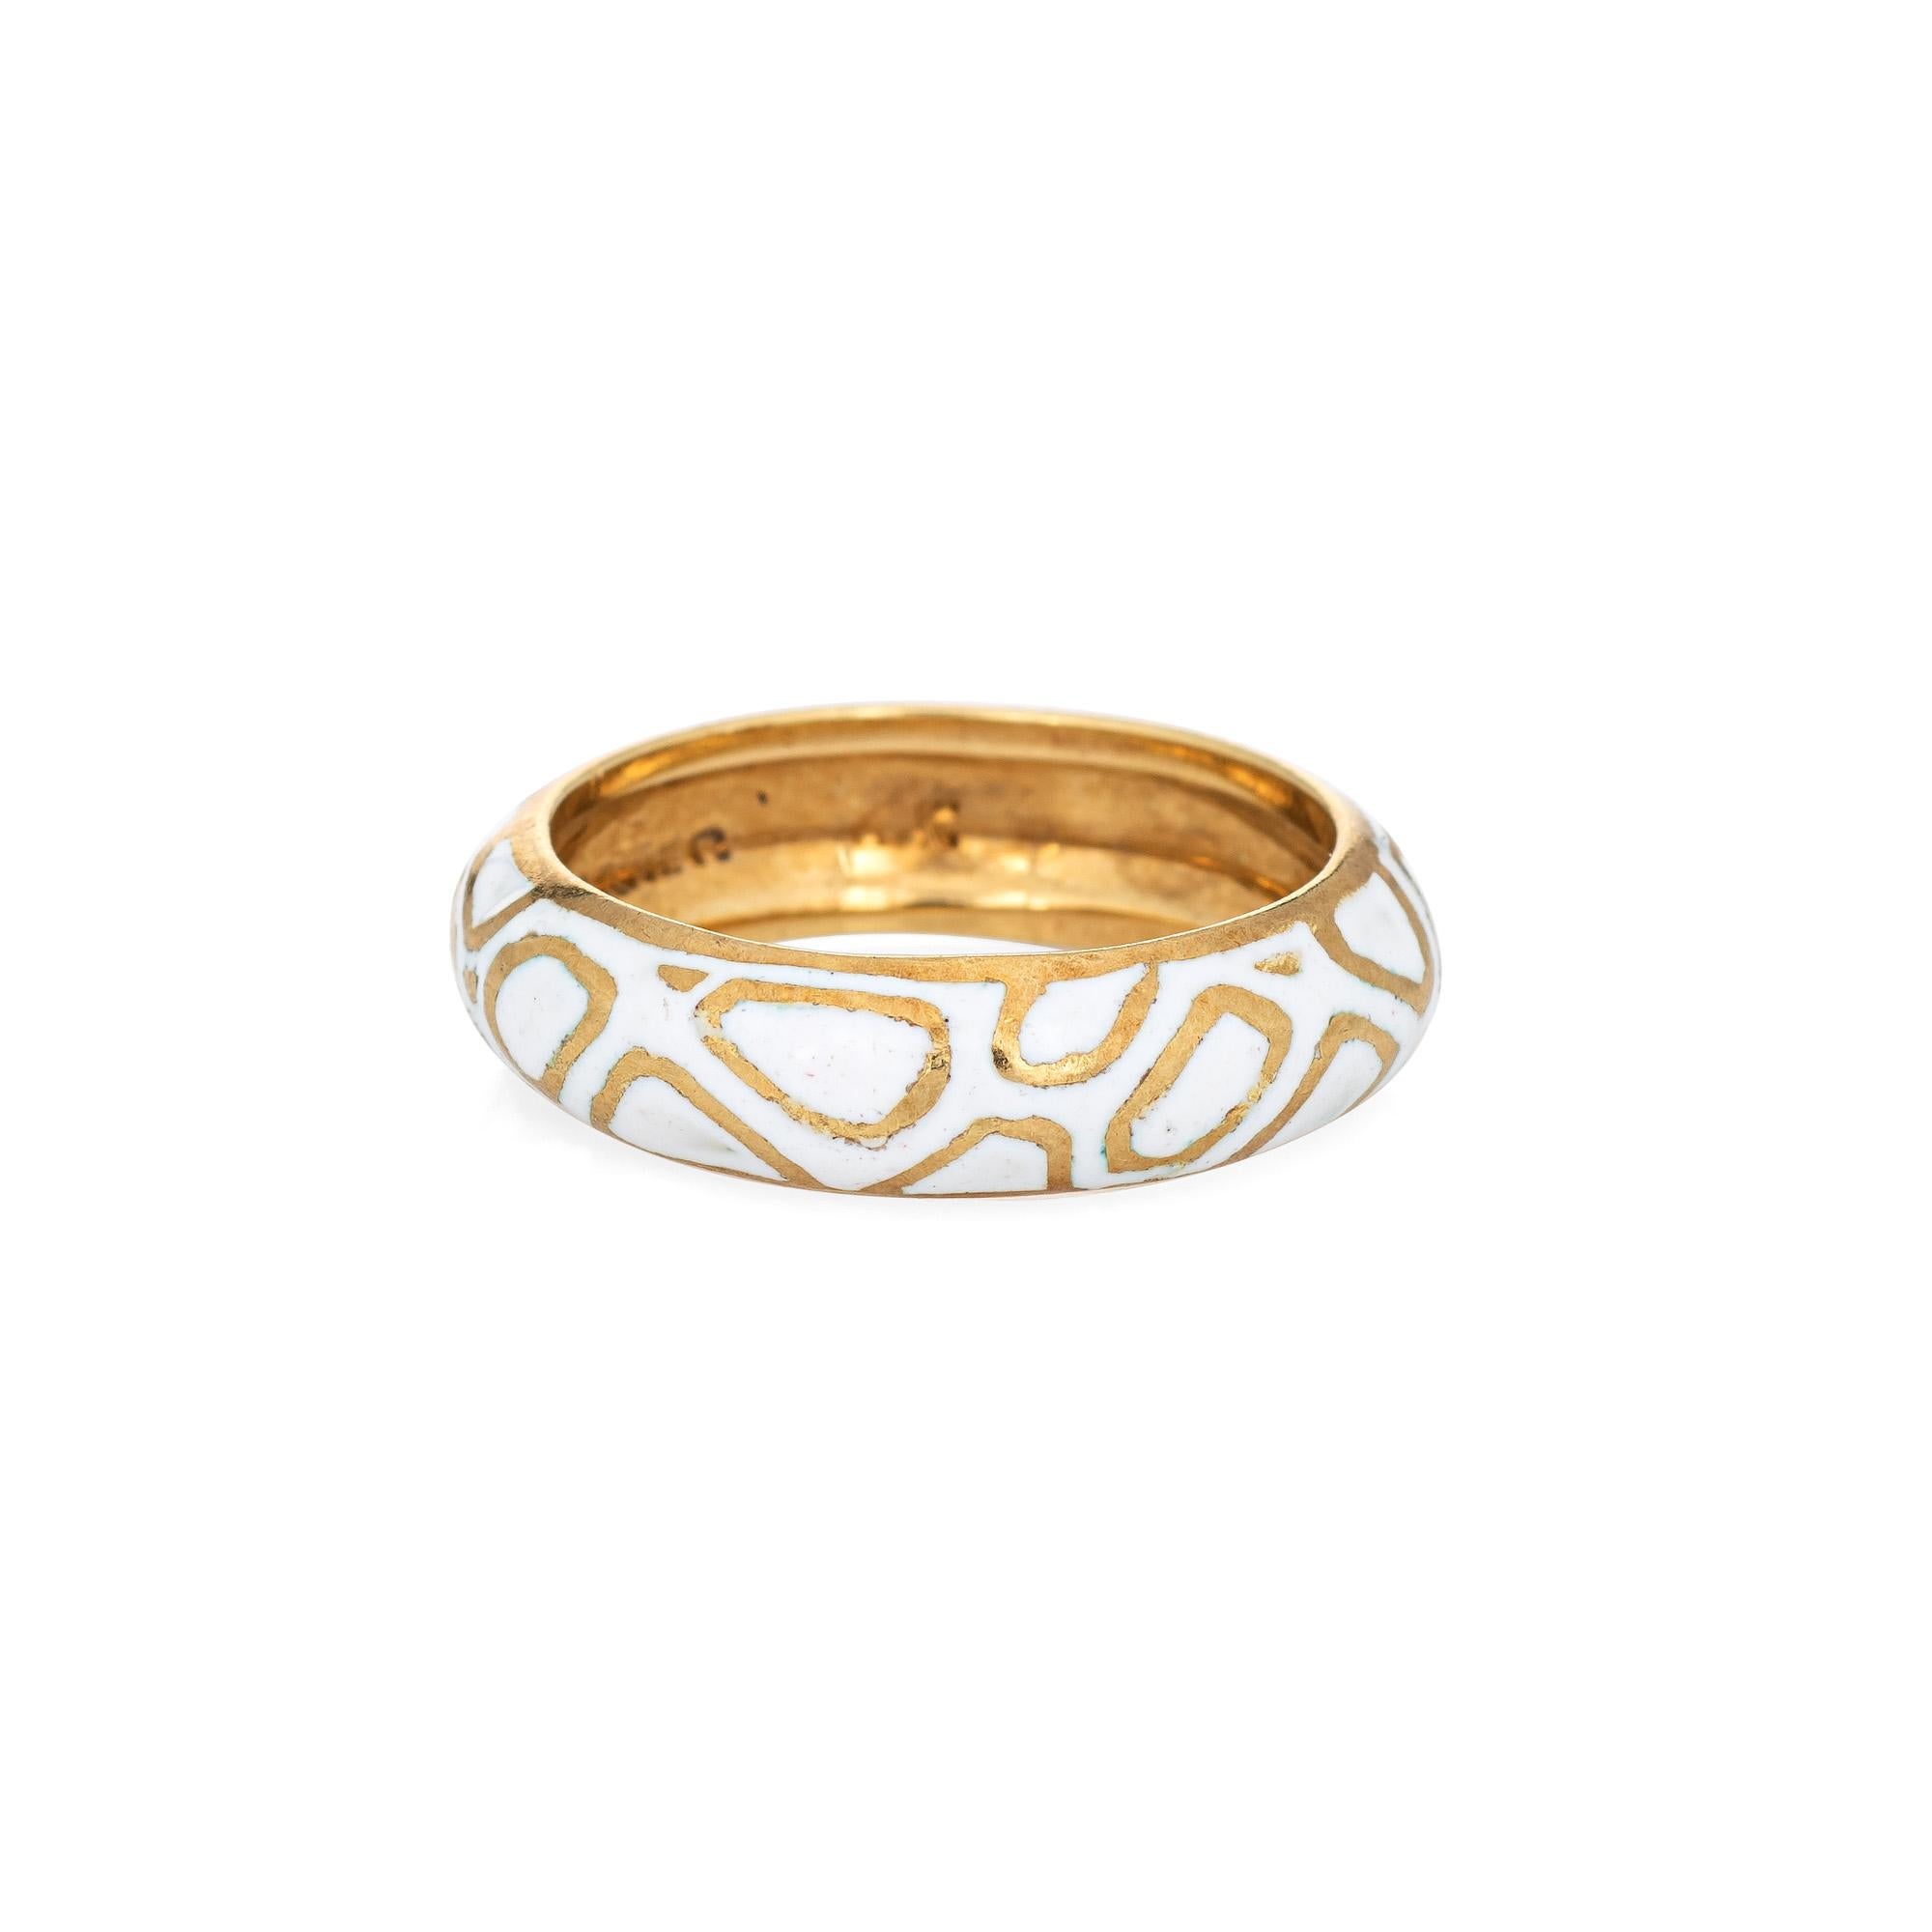 Vintage Cartier enamel ring crafted in 18k yellow gold (circa 1960s to 1970s).  

The Cartier ring features an abstract white enamel pattern around the entire band. The band measures 5mm wide (0.19 inches). The ring is great worn alone or layered